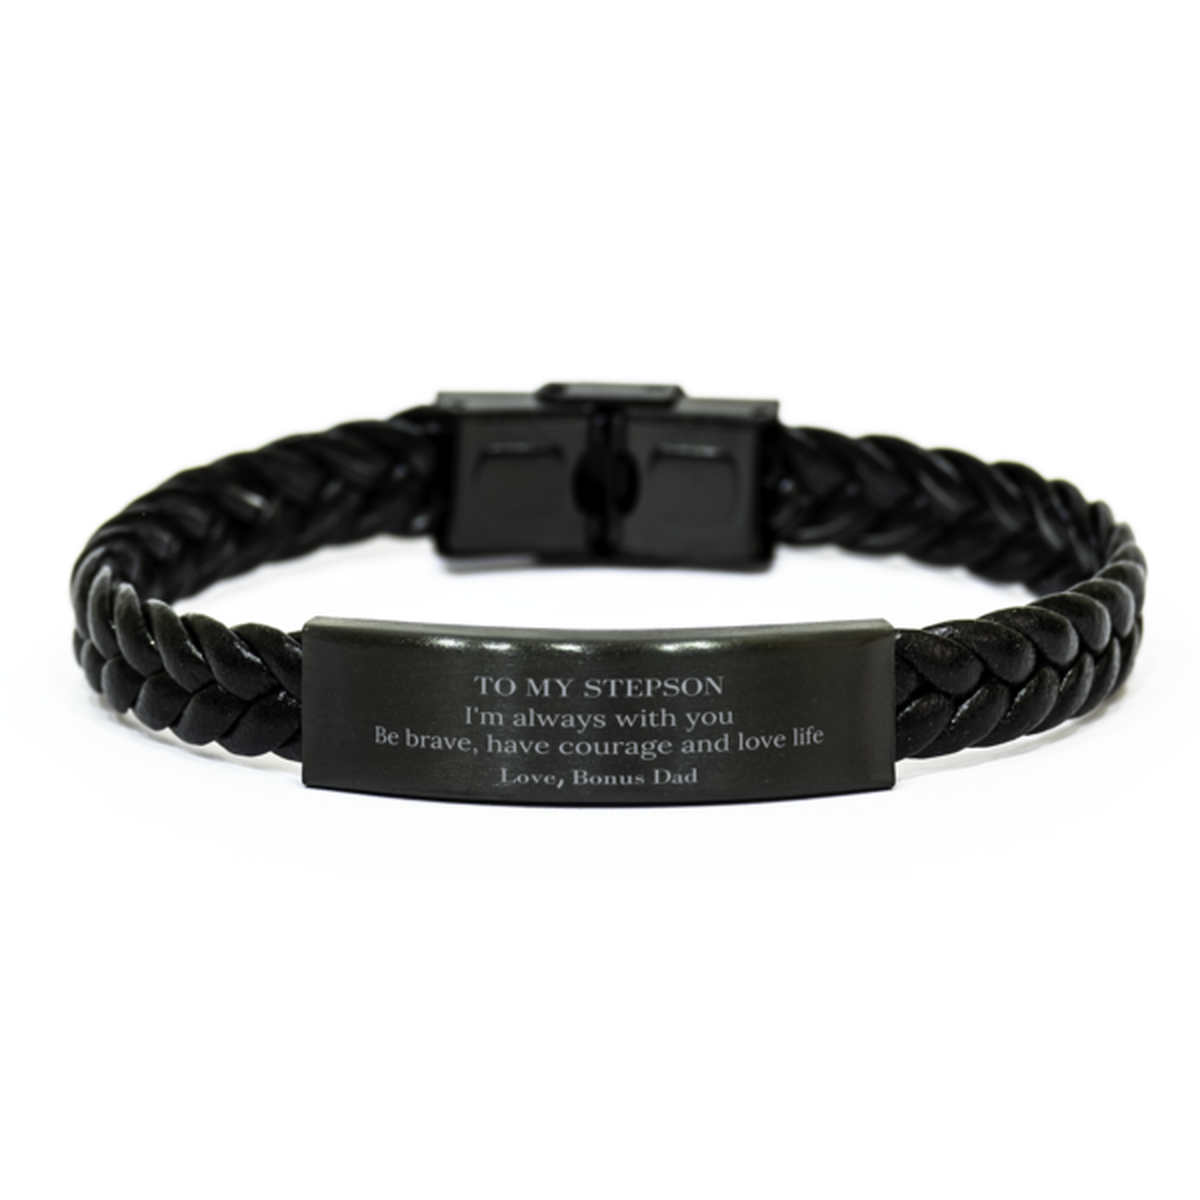 To My Stepson Gifts from Bonus Dad, Unique Braided Leather Bracelet Inspirational Christmas Birthday Graduation Gifts for Stepson I'm always with you. Be brave, have courage and love life. Love, Bonus Dad